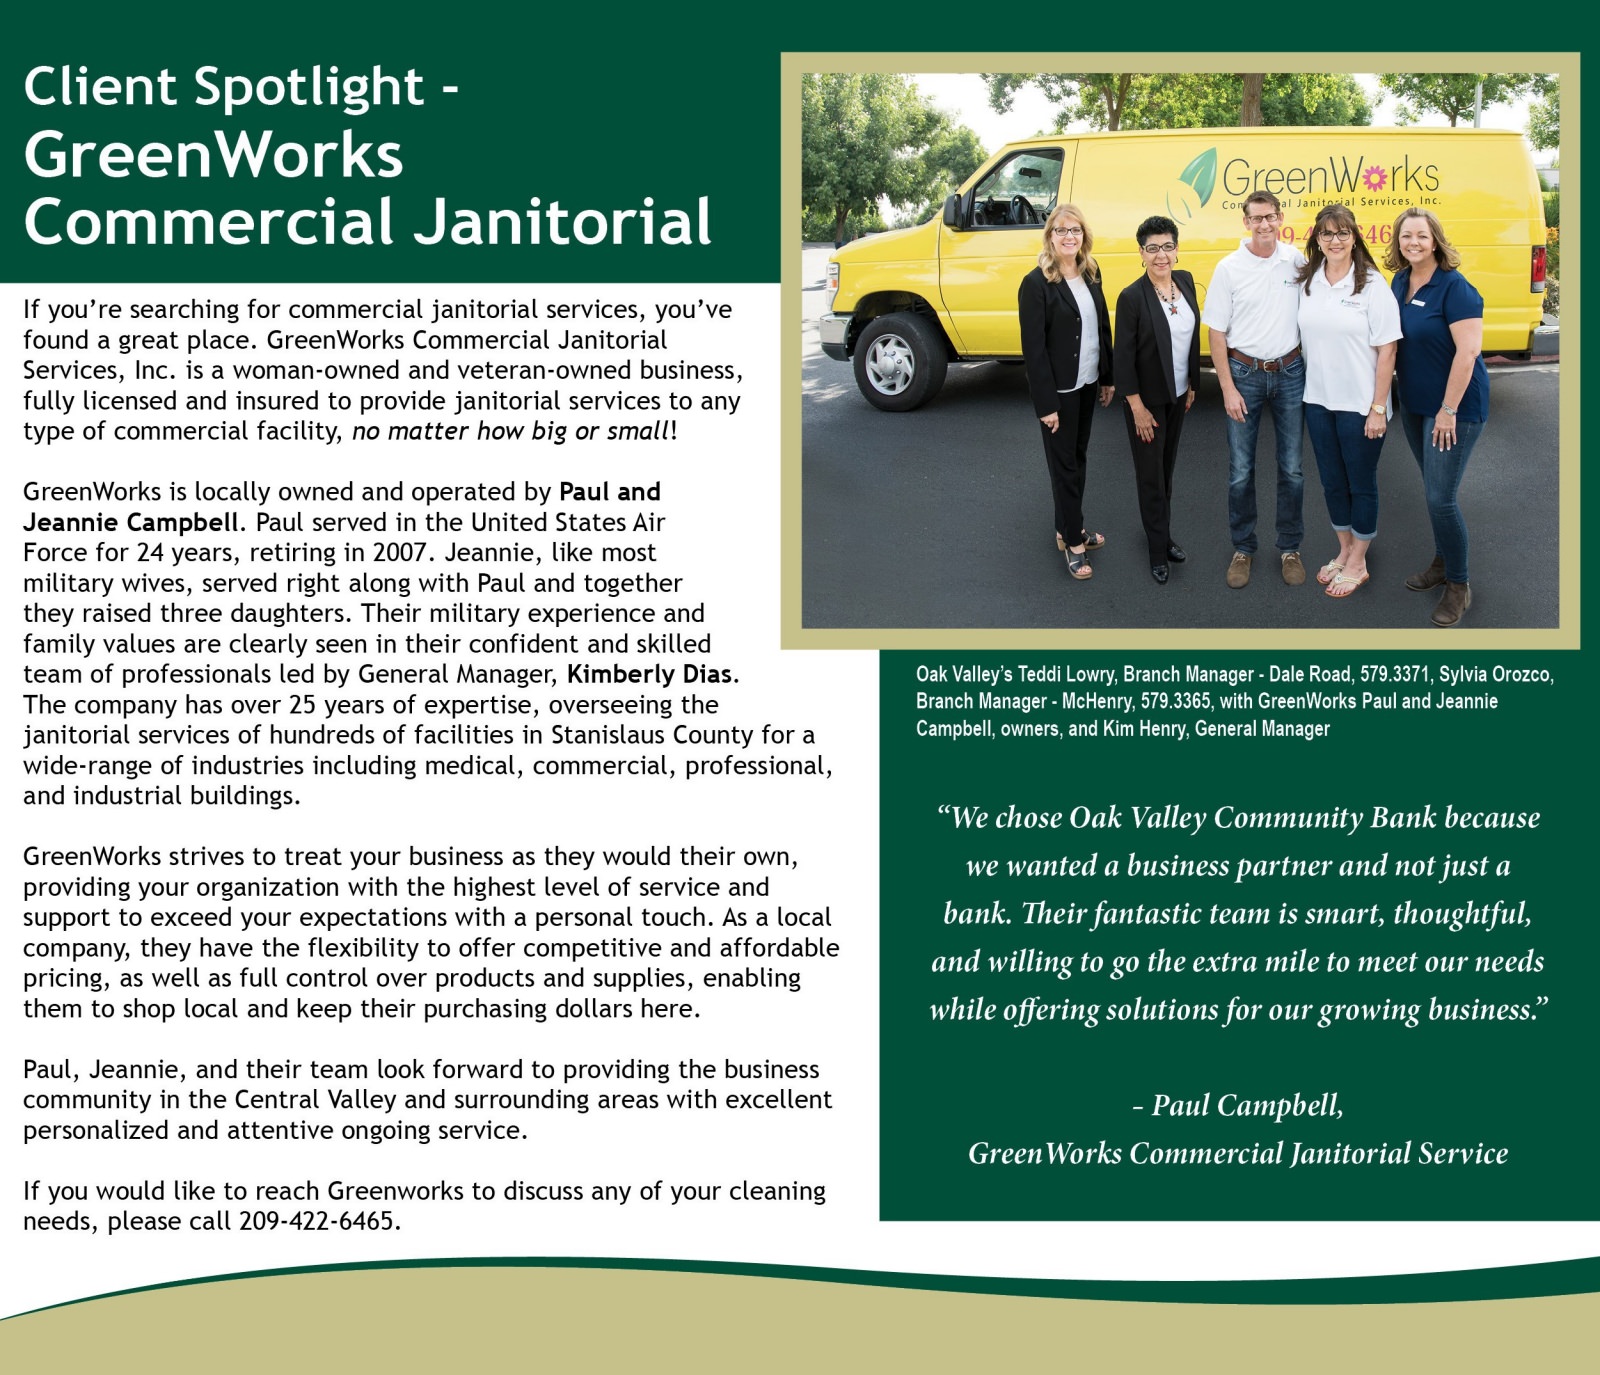 Oak Valley Community Bank's Client Spotlight – GreenWorks Commercial Janitorial